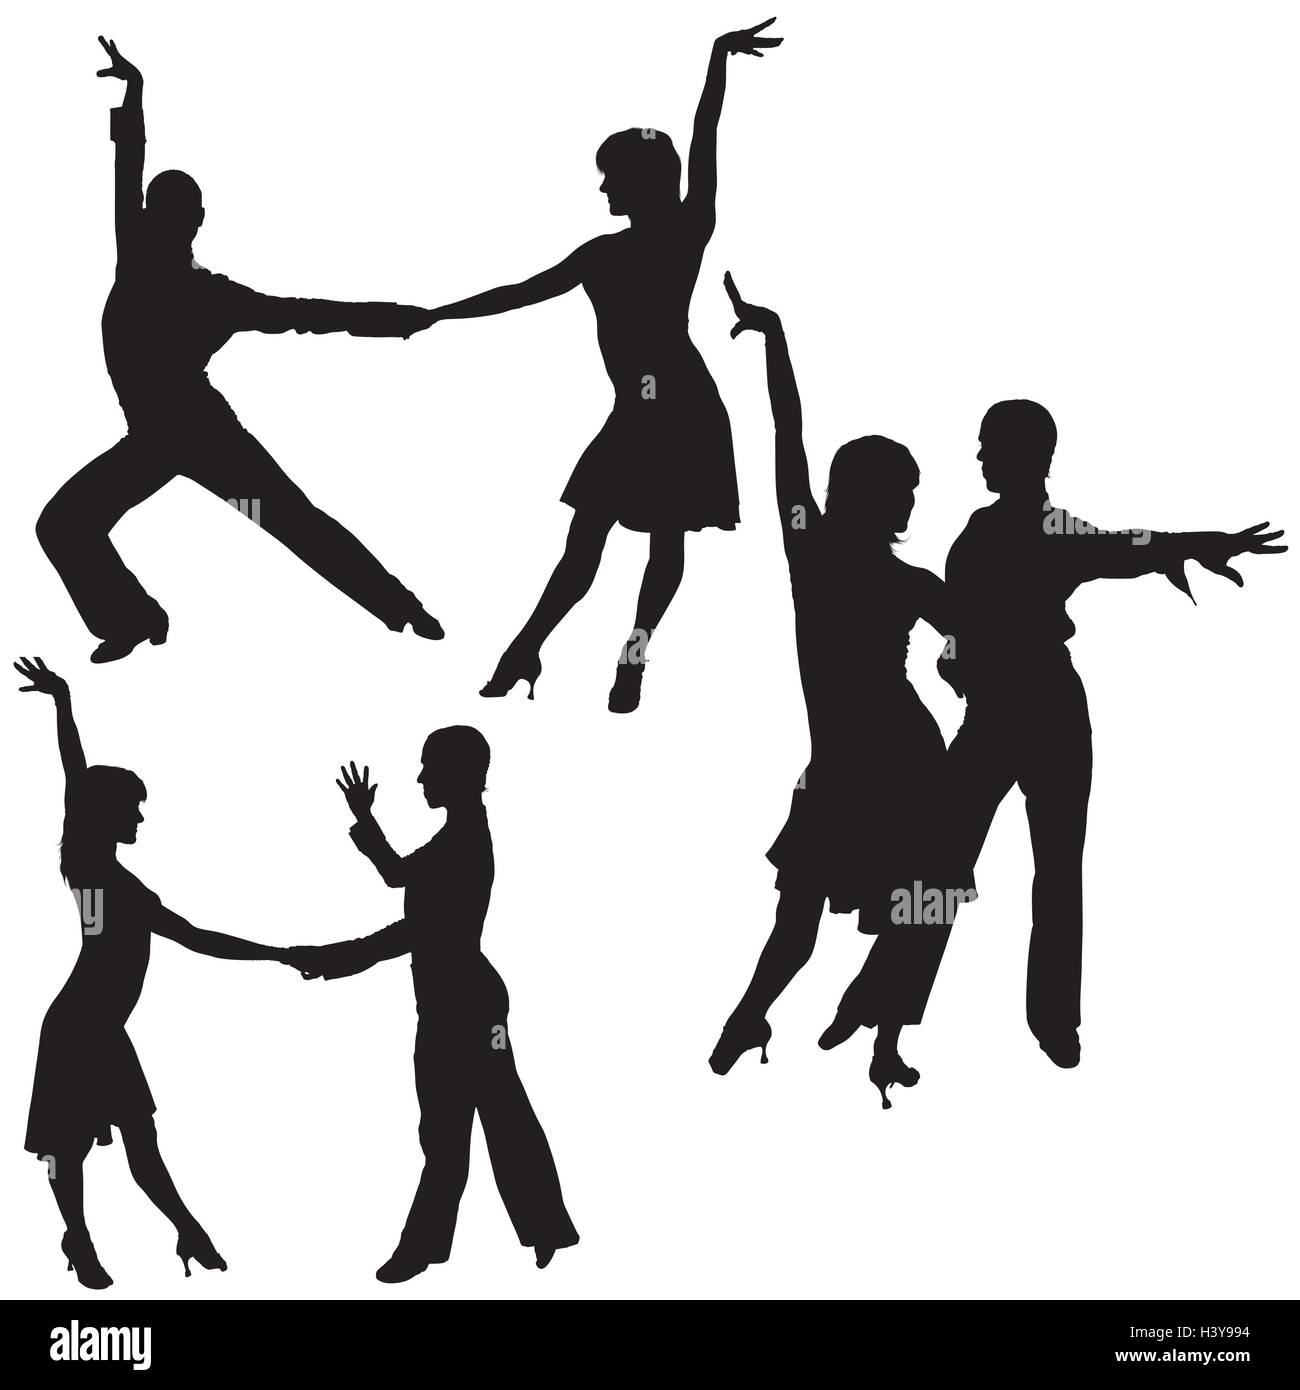 Latino Dancers Silhouettes Stock Vector